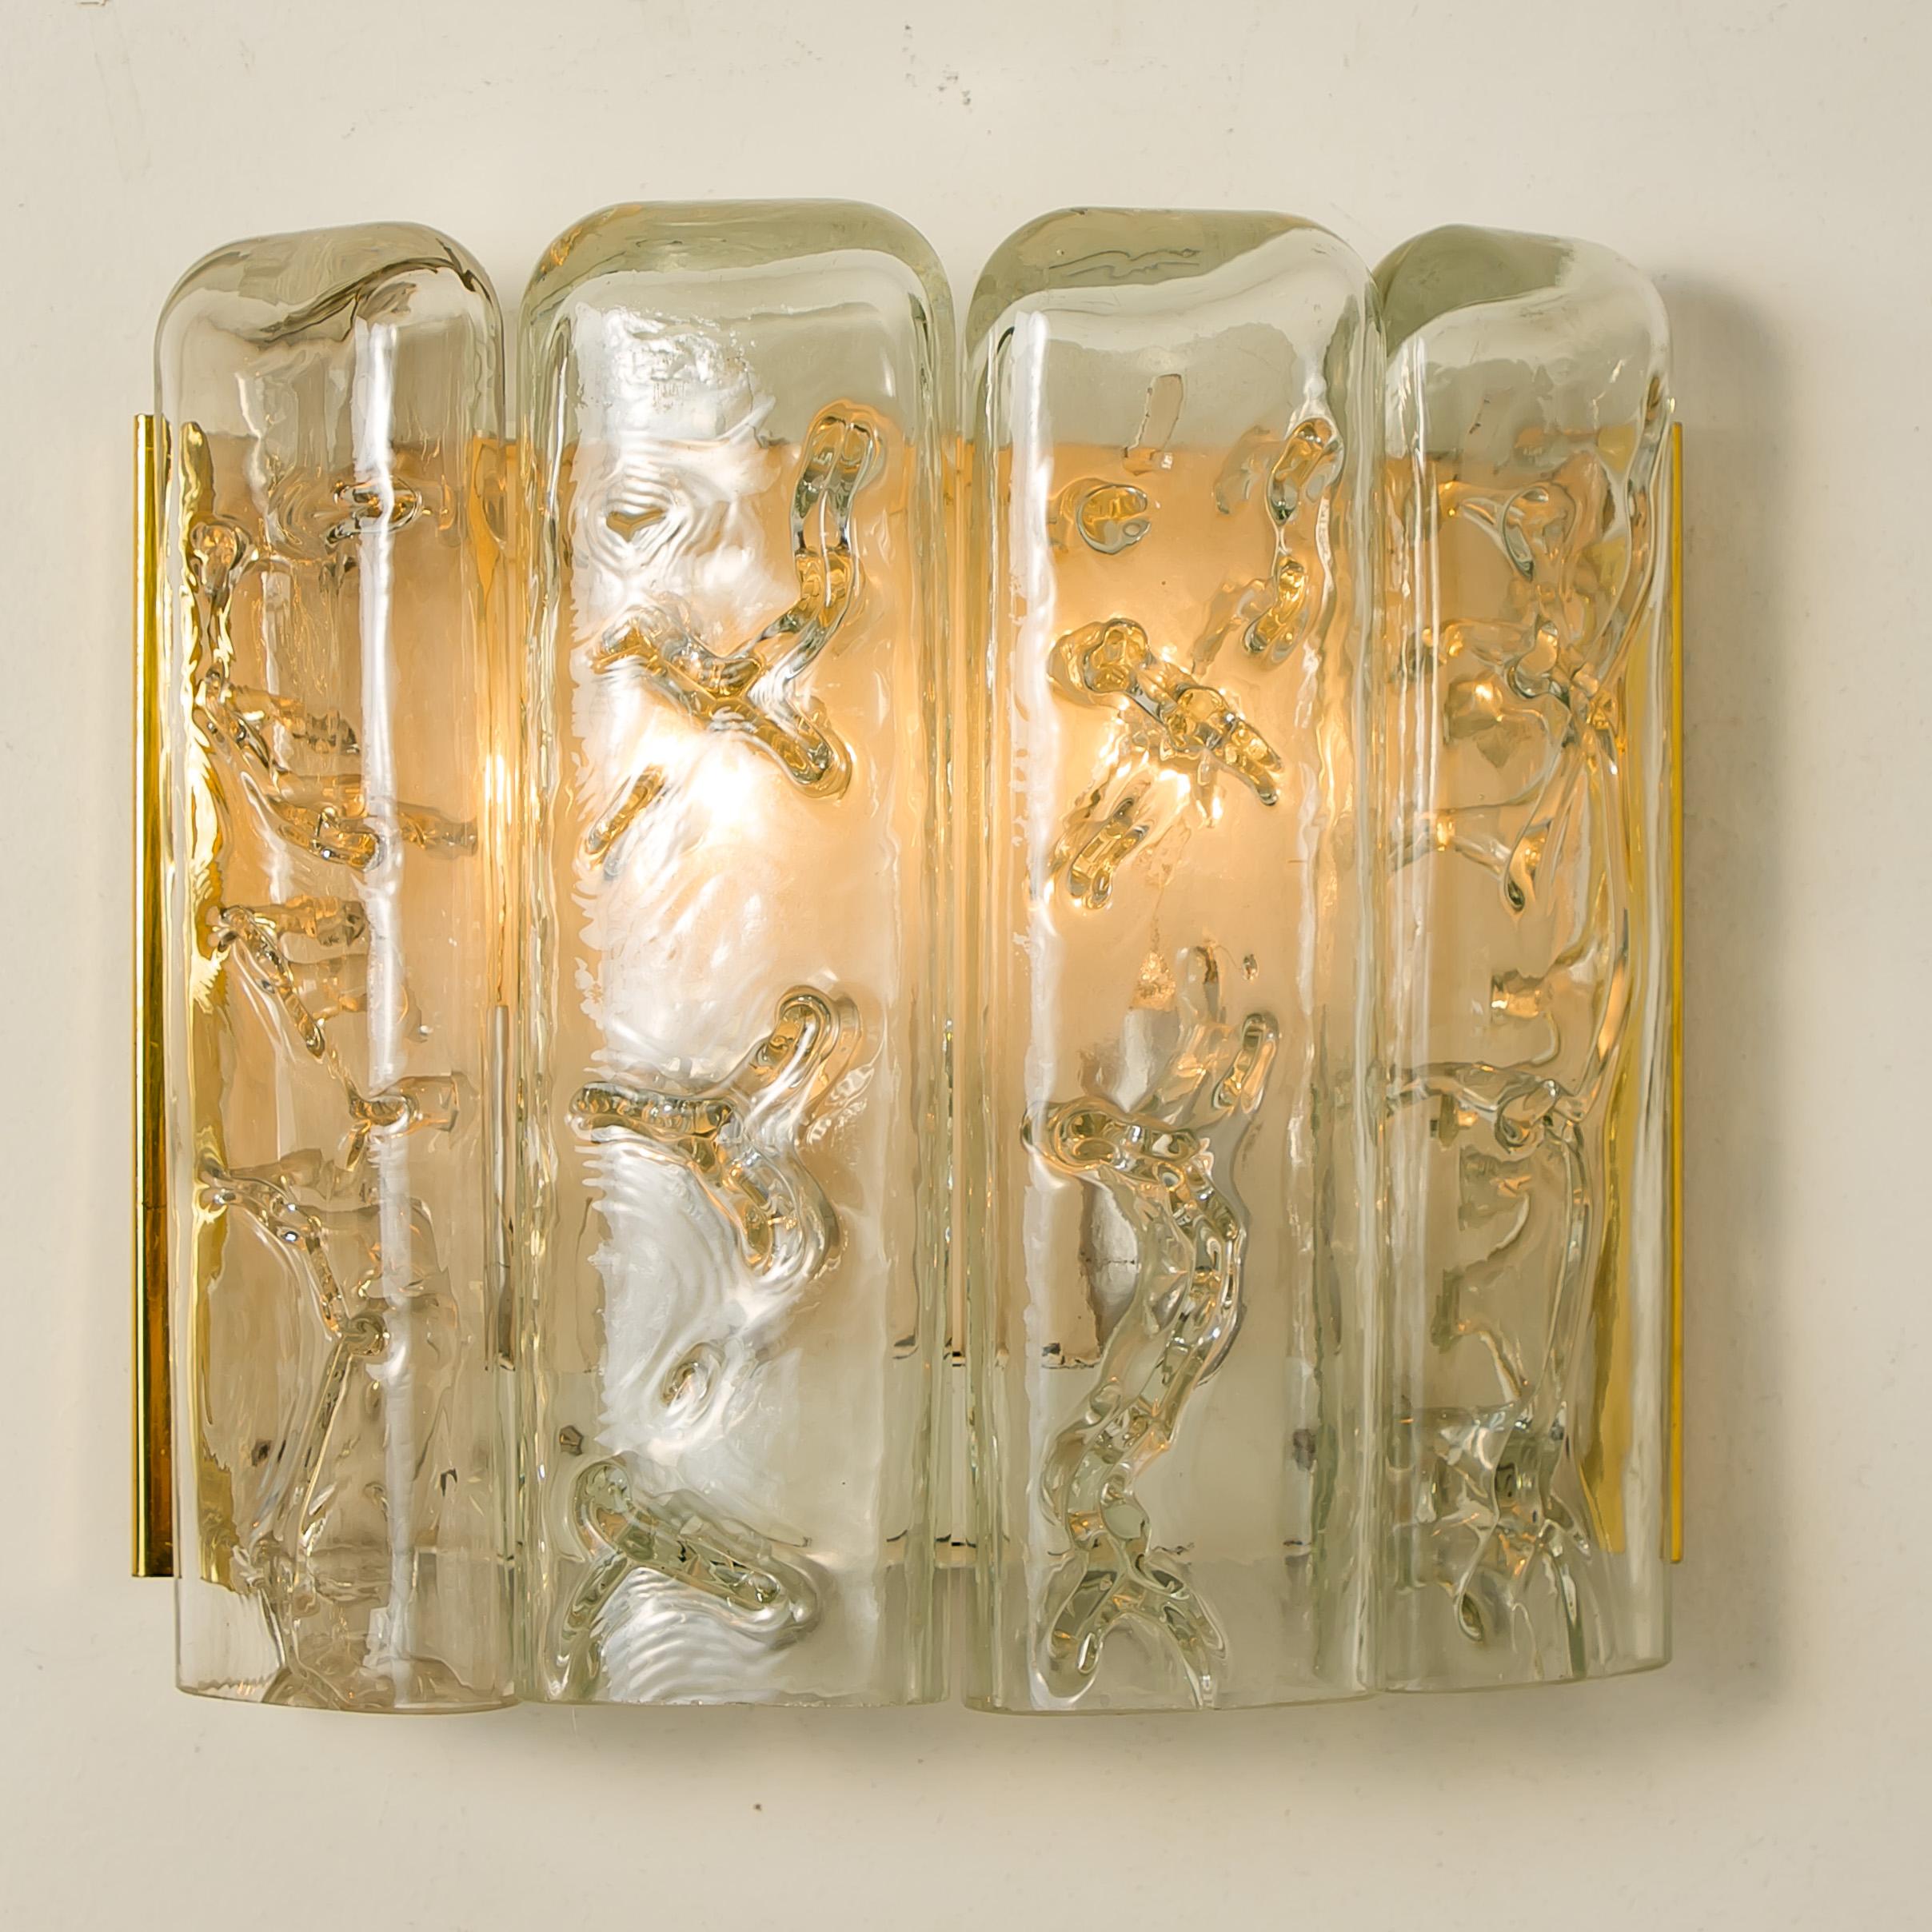 This pair of wall sconces date from the 1960s and were created by the iconic firm of Doria Leuchten in Germany. They are fabricated with a back-plate in polished brass and with four molten-glass, flat tubular prisms that are clear and frosted.